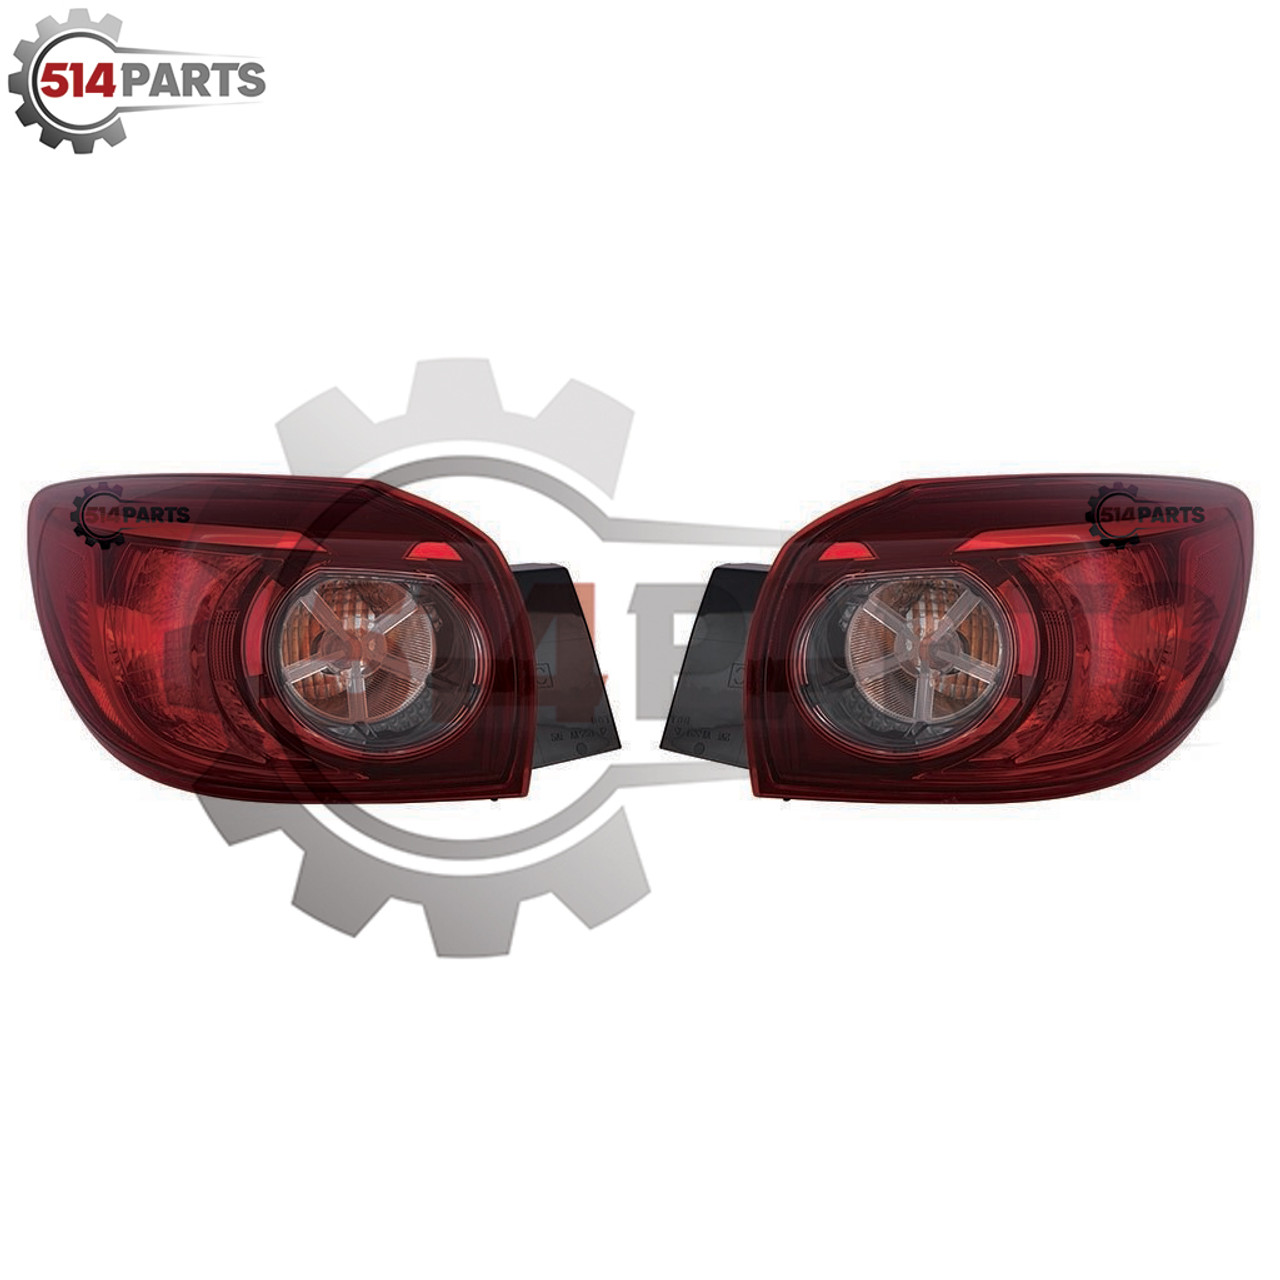 2014 - 2018 MAZDA 3 and MAZDA 3 SPORT(CANADA) Hatchback JAPAN BUILT BULB TYPE TAIL LIGHTS High Quality - PHARES ARRIERE avec AMPOULE Haute Qualite